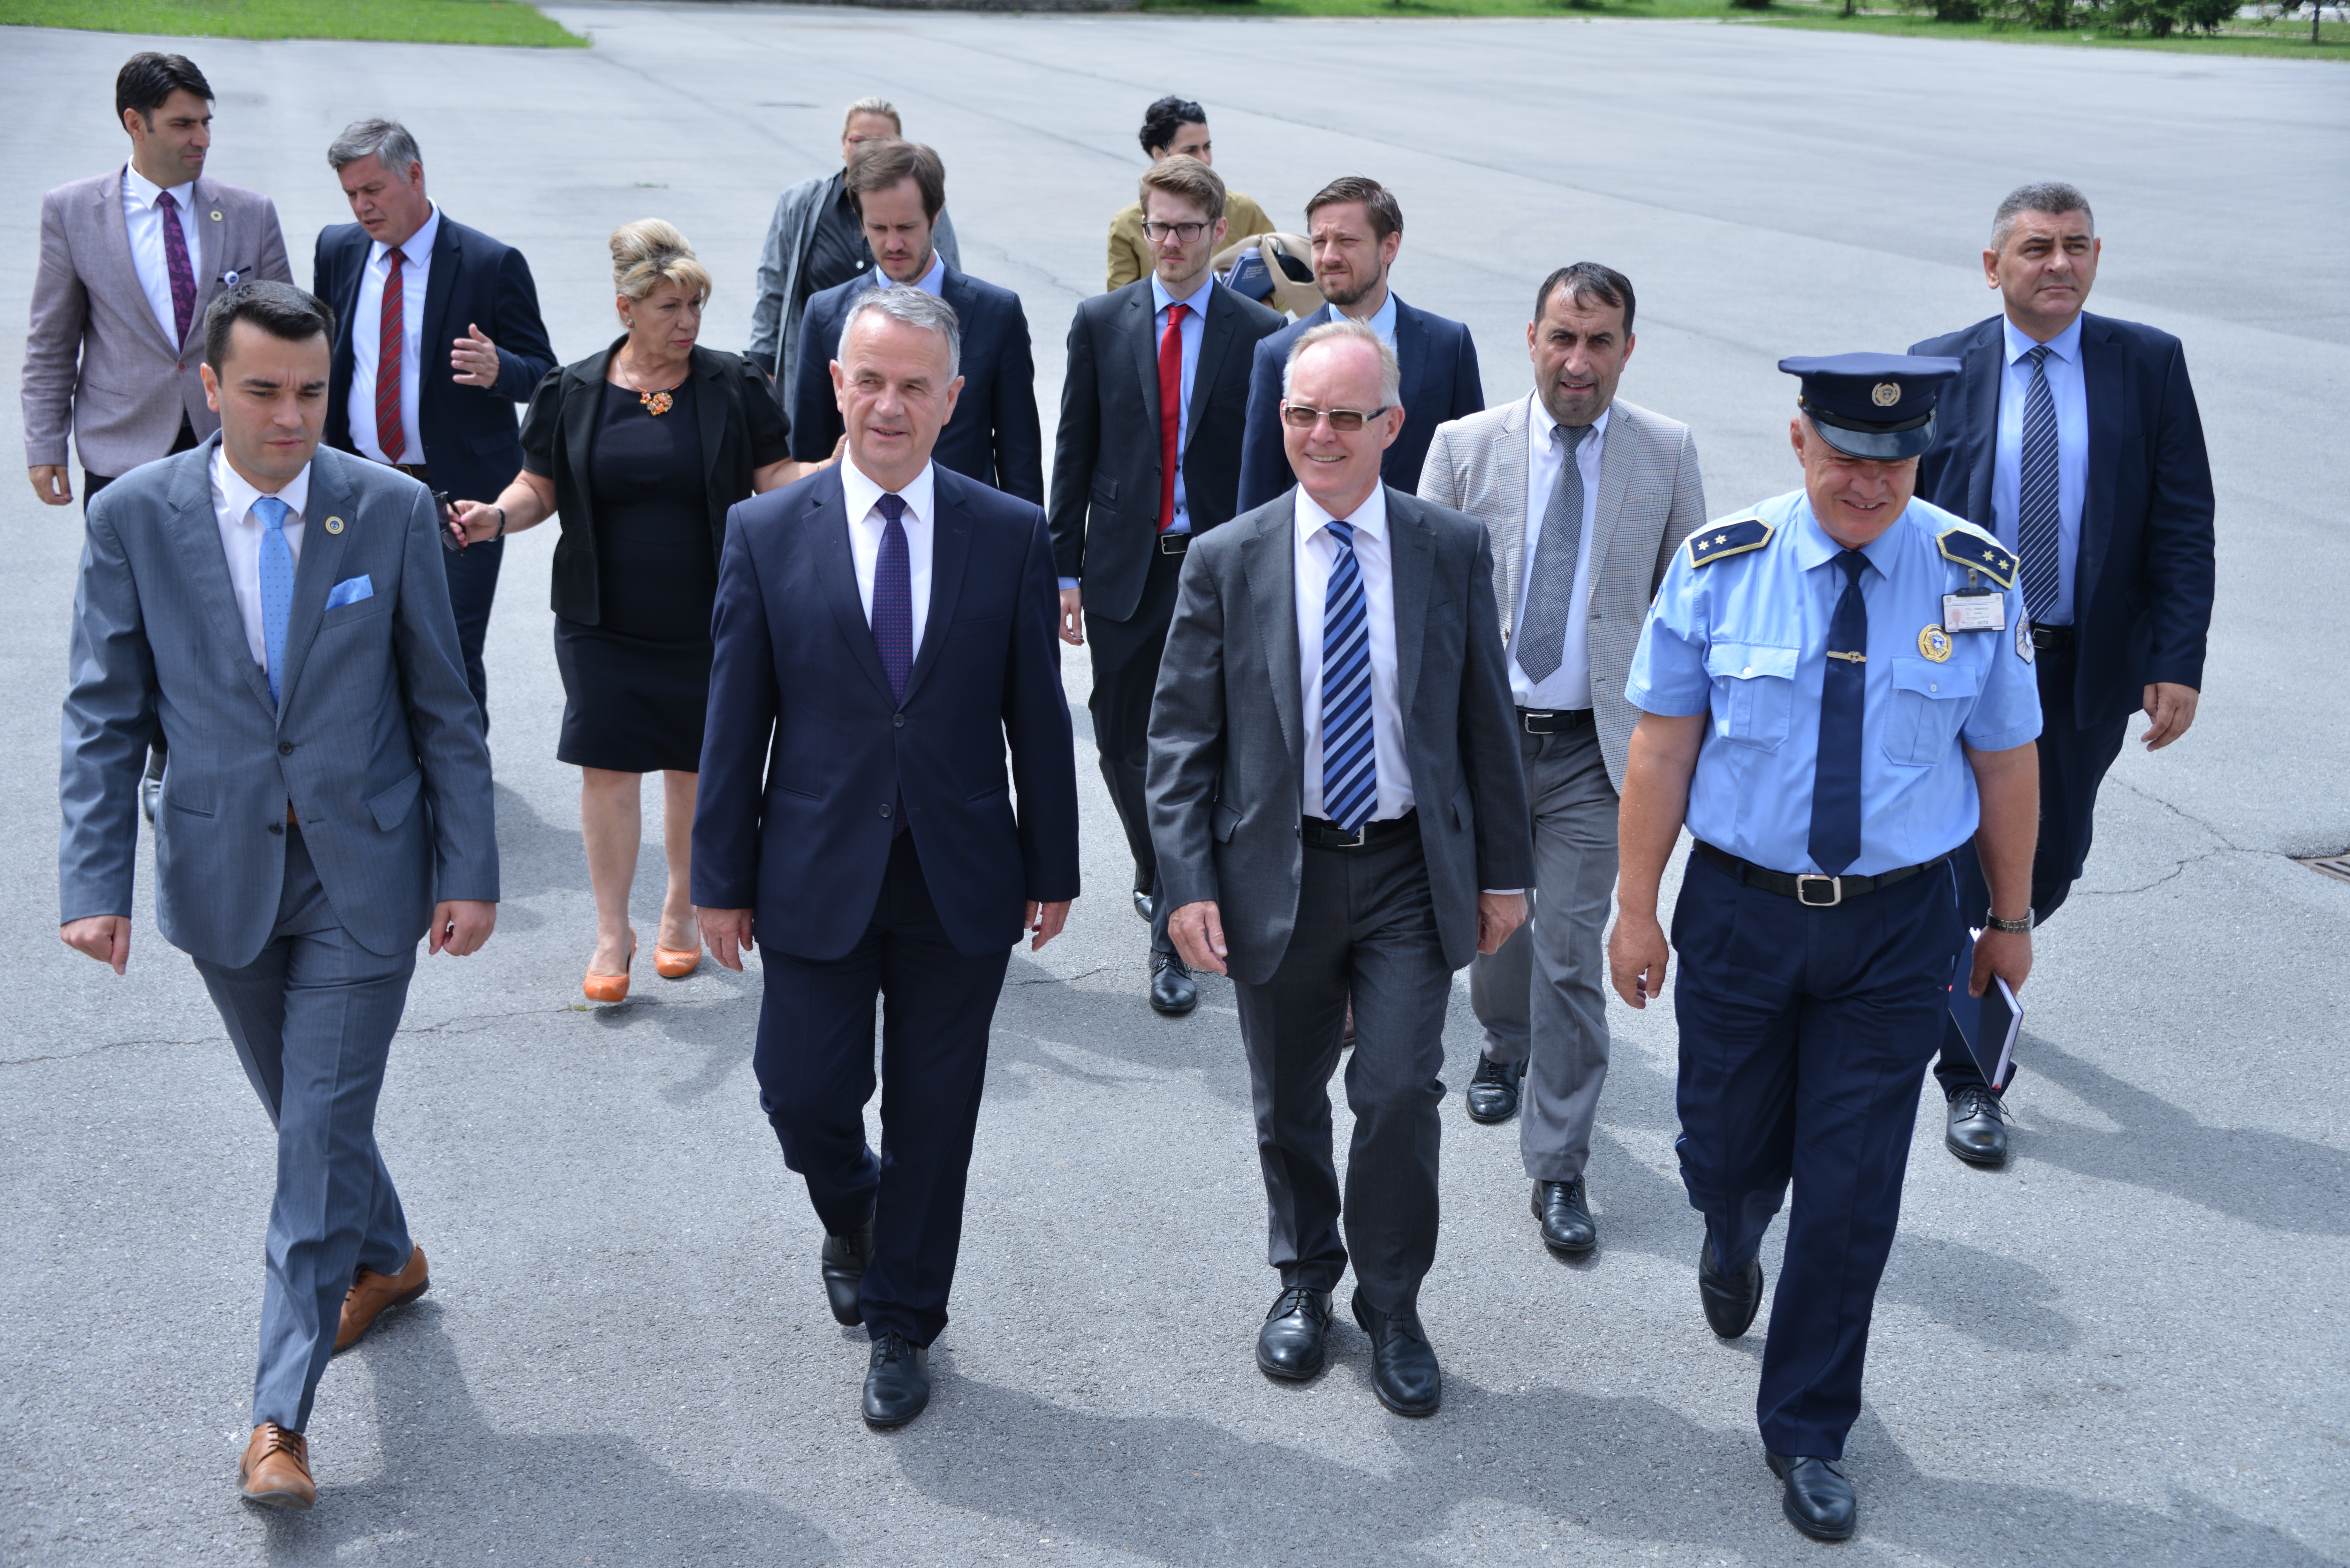 William Sæter and Magnar Aaberg visiting Kosovo Academy of Public Safety in Prishtina